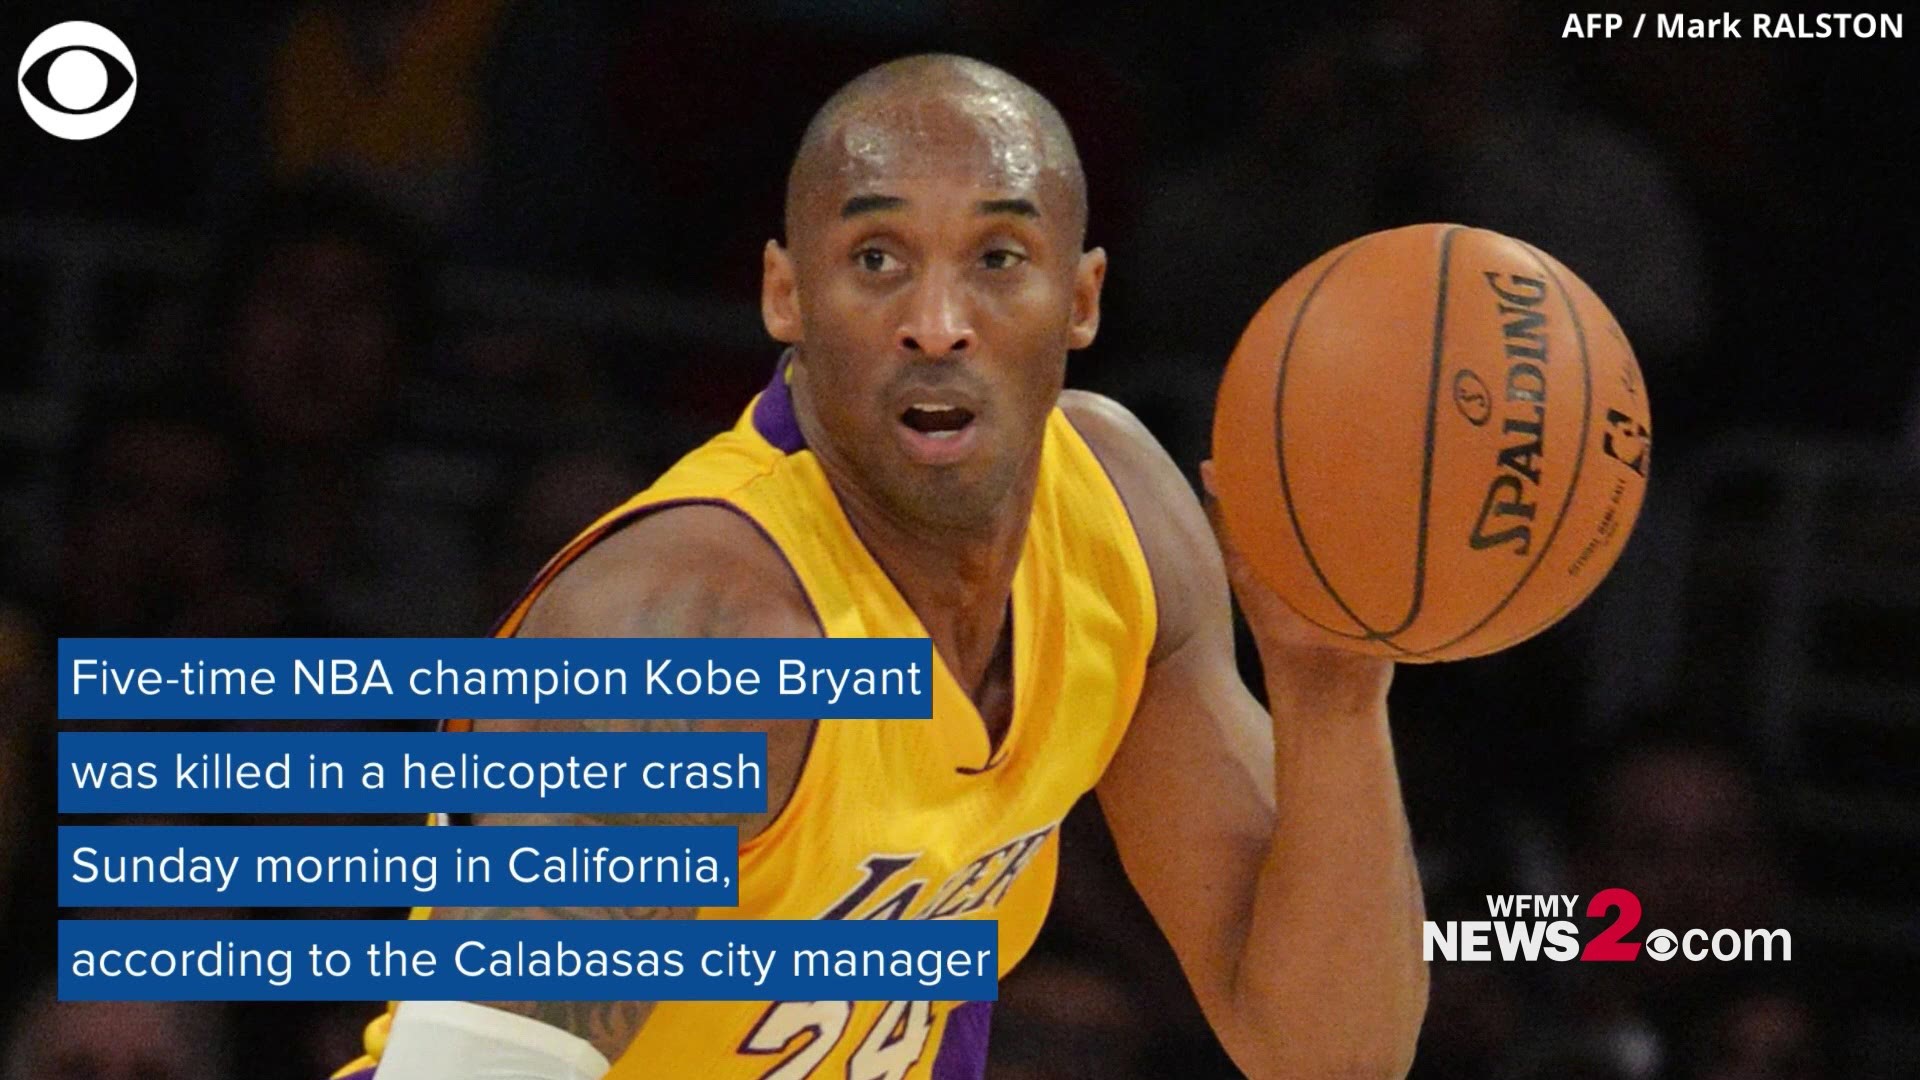 Kobe Bryant was one of the greatest basketball players of all time, here’s a look at some career highlights.